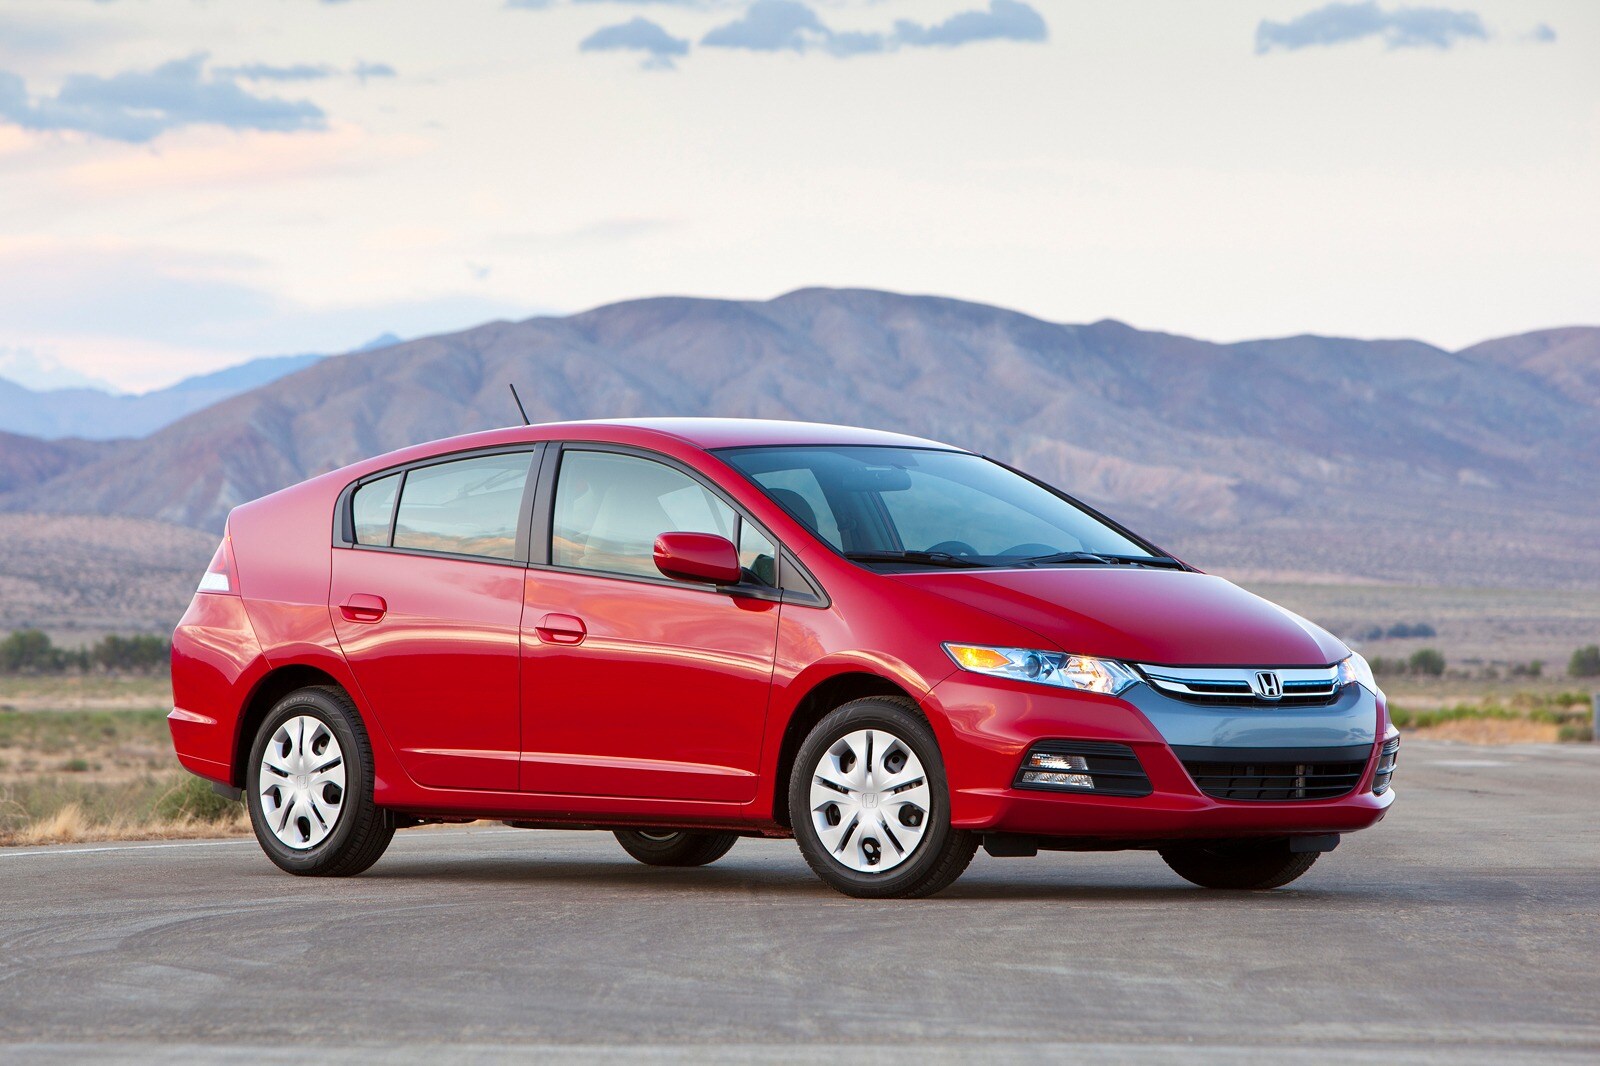 Top 10 Least Expensive Hybrids and Electric Cars for 2014 - Edmunds.com